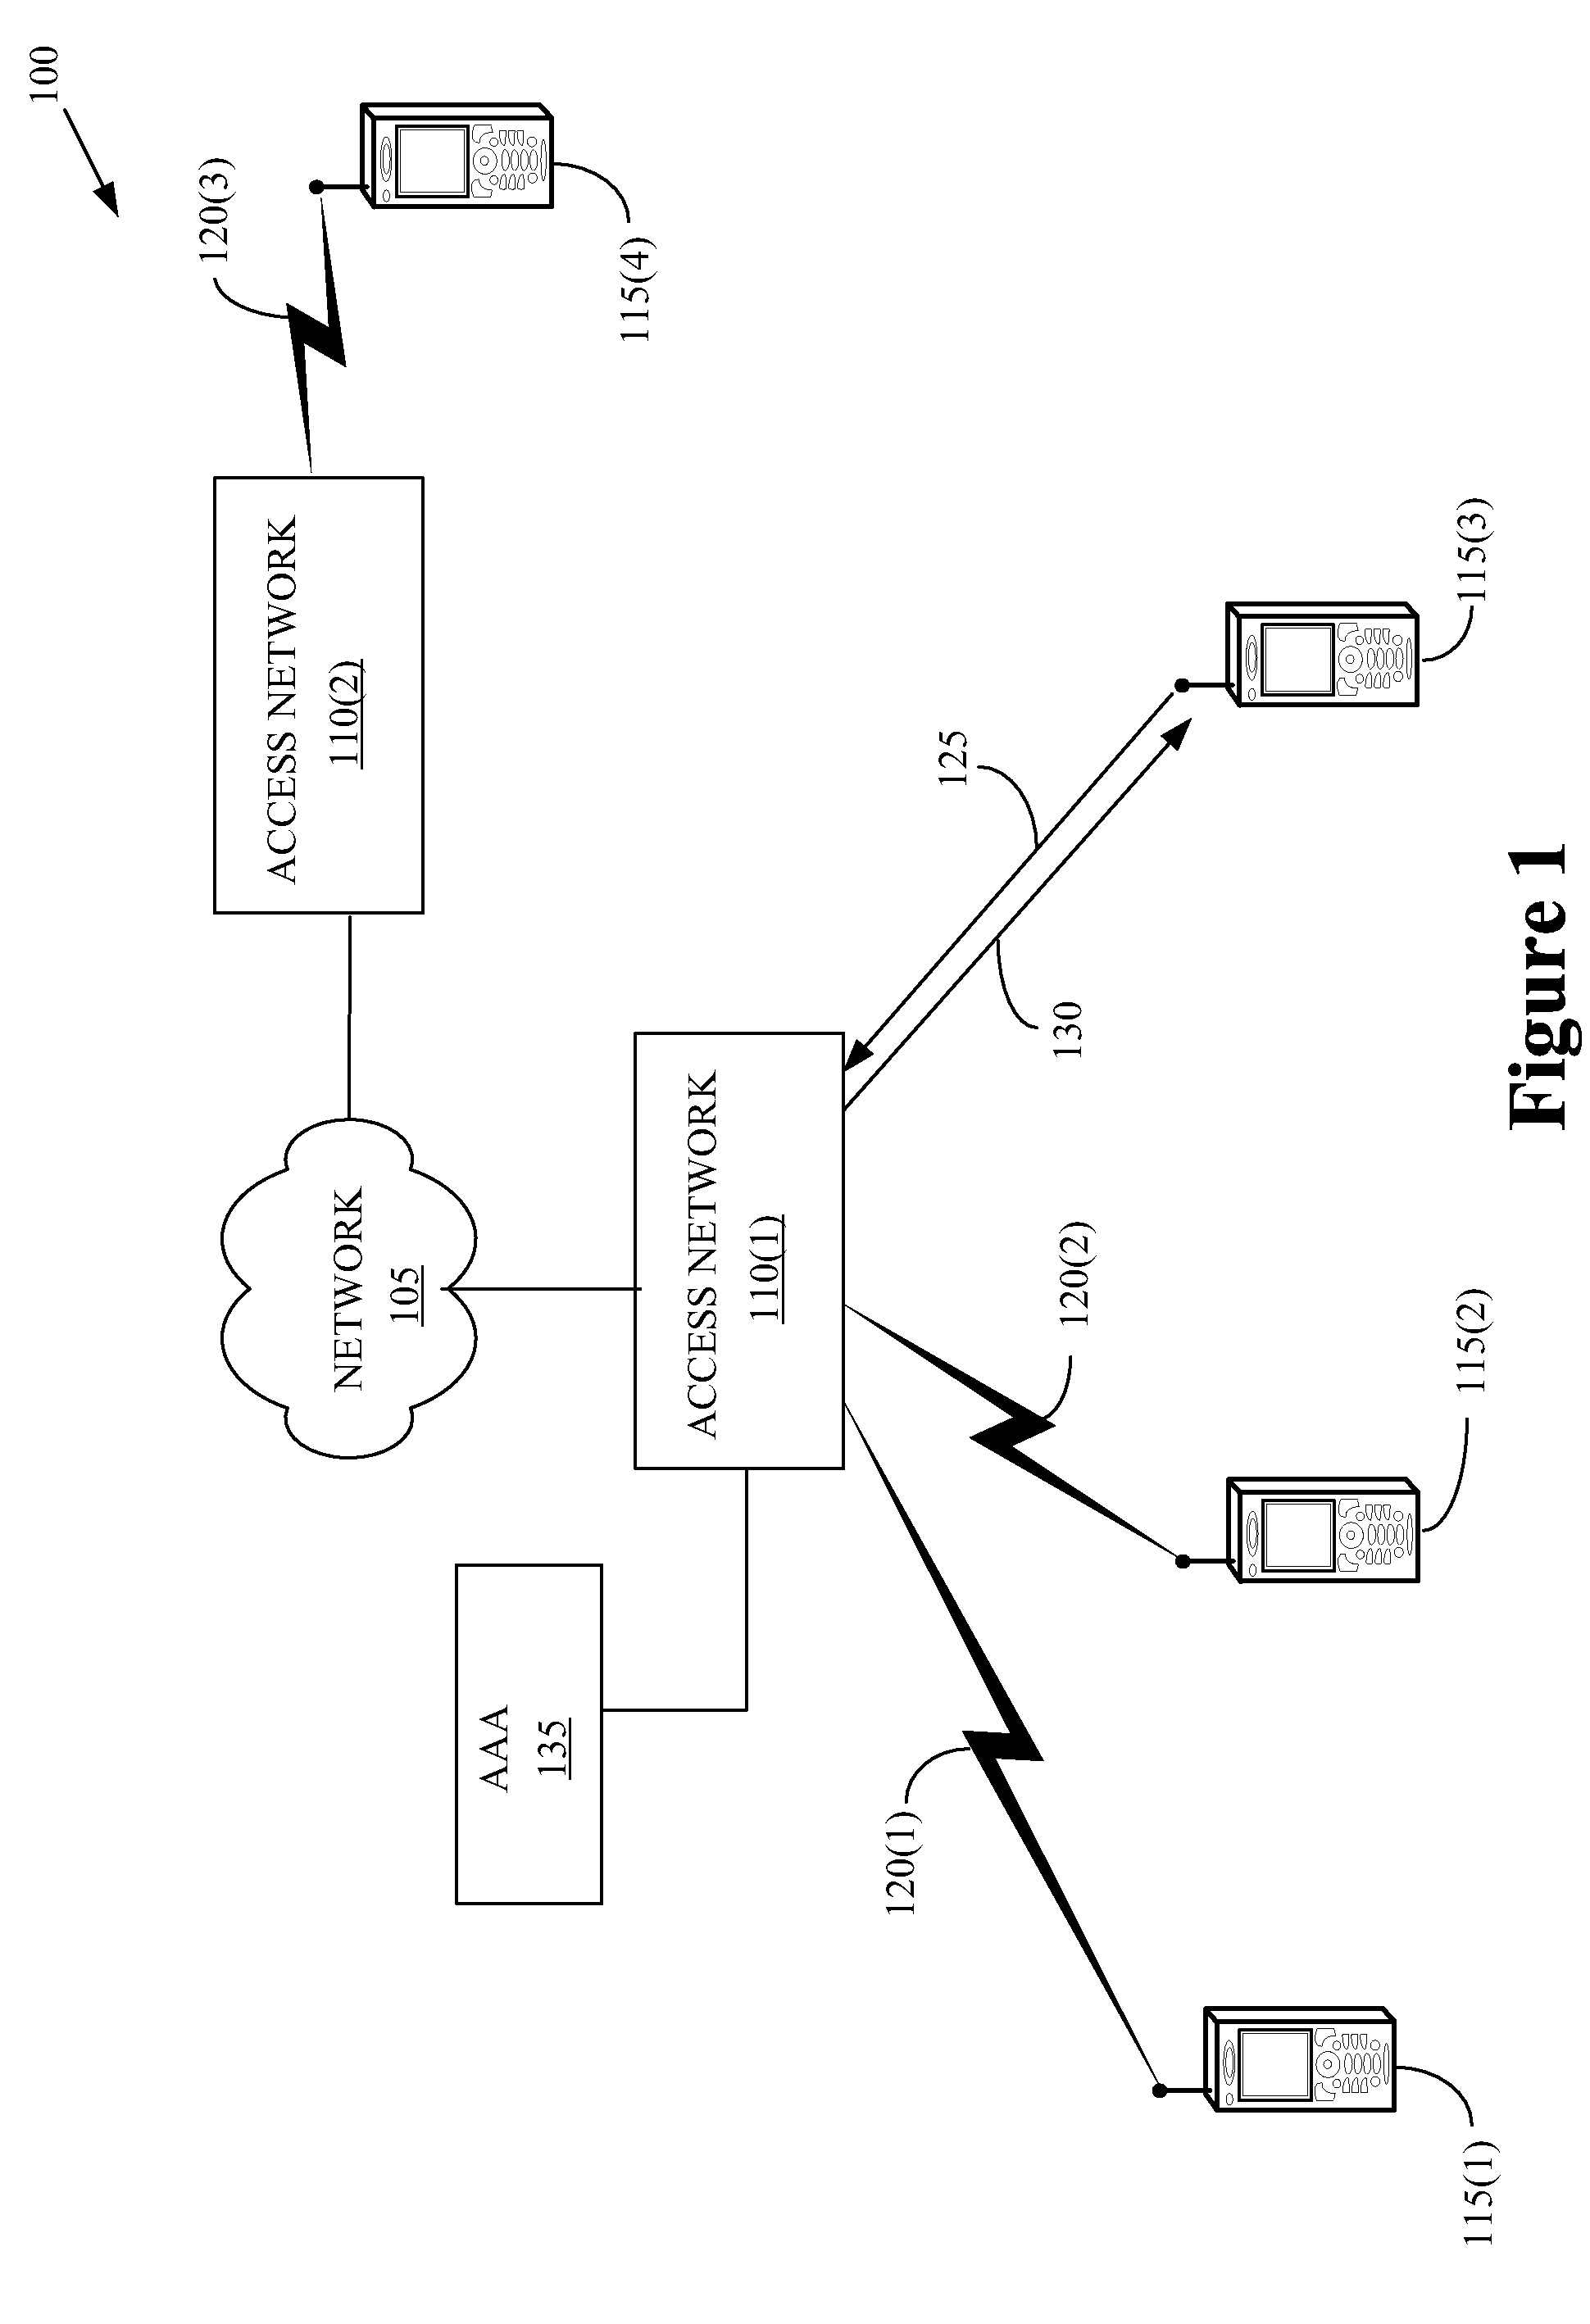 Method of determining characteristics of access classes in wireless communication systems